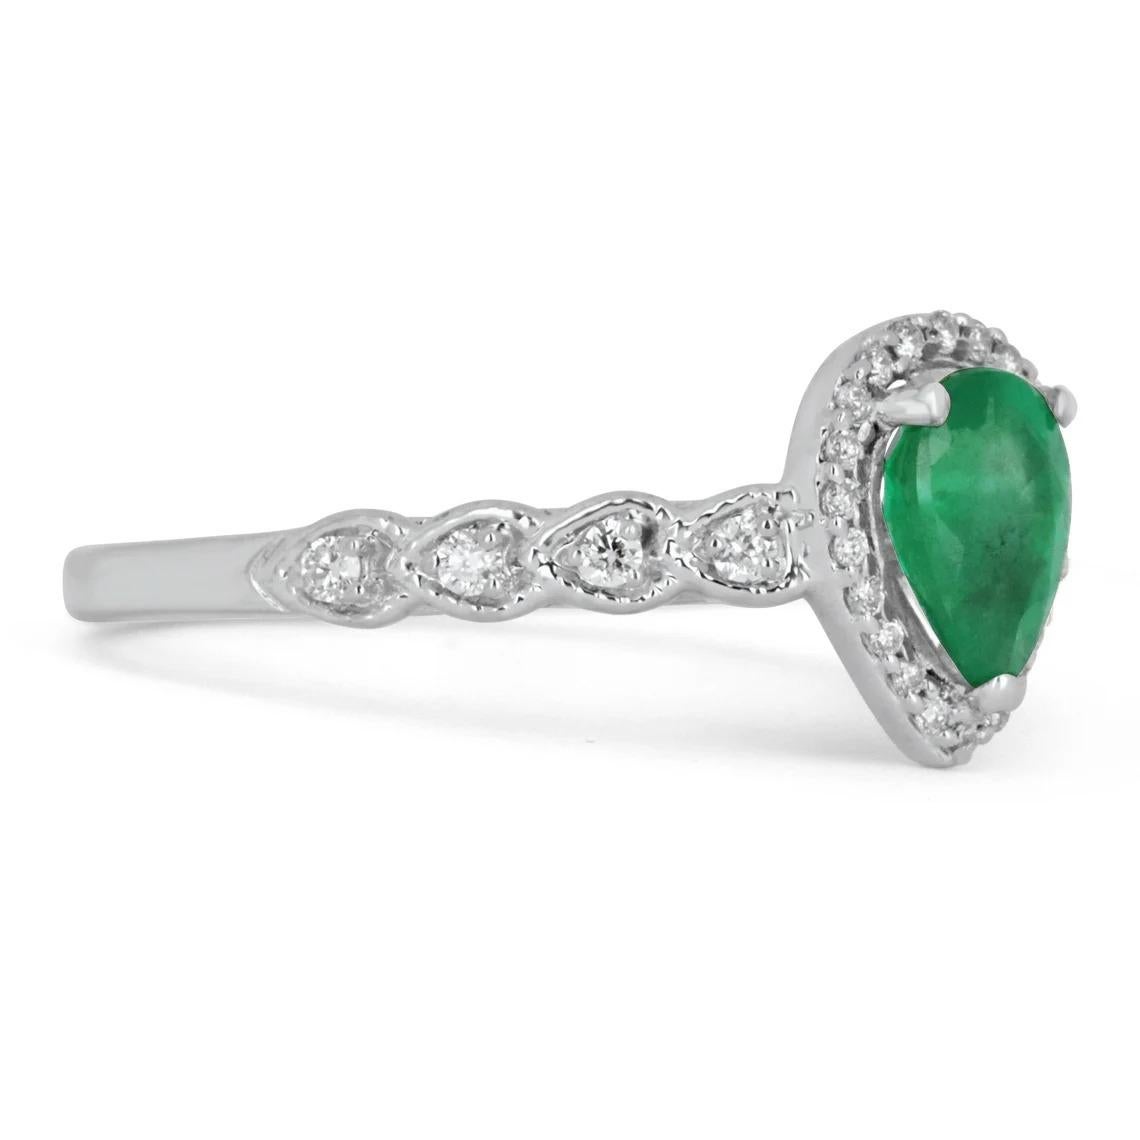 Elegantly displayed is a natural Colombian emerald and diamond halo engagement ring. The center gem is a fine quality pear-shaped emerald filled with life and brilliance! Among the emeralds, impressive qualities are its vibrant color and beautiful